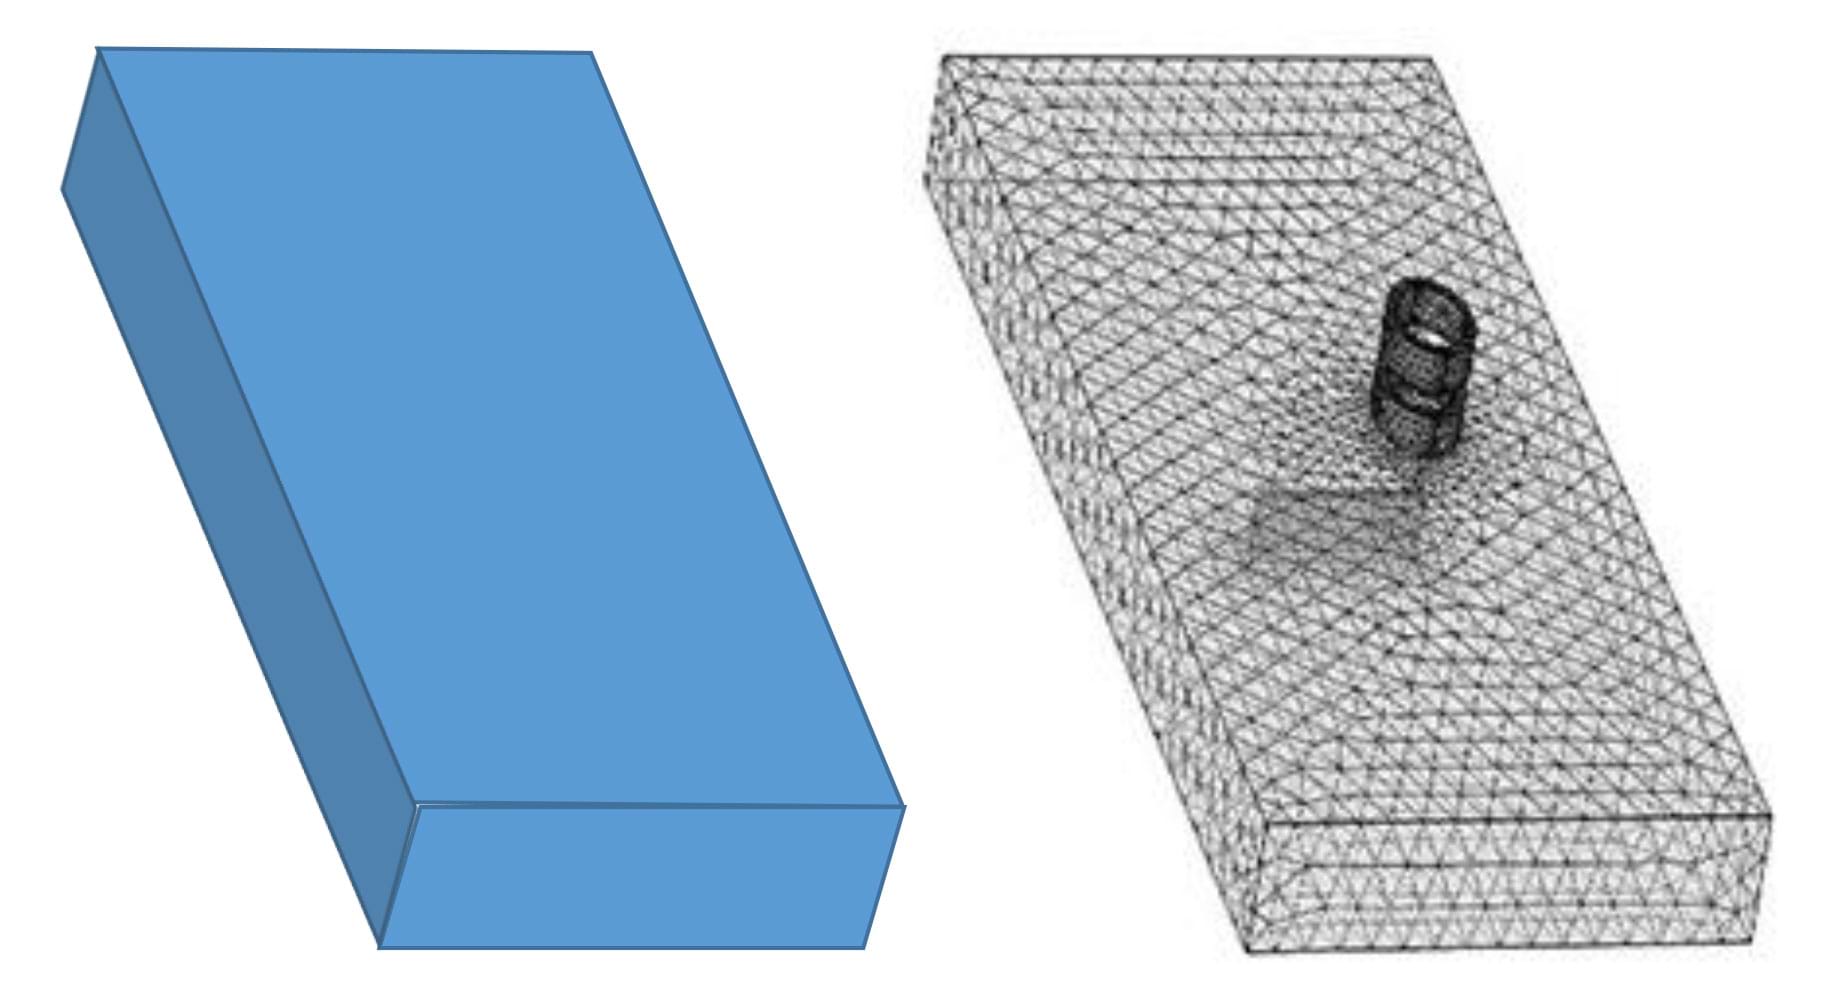 Two similar 3D drawings of rectangular prisms. The left diagram appears solid while the right diagram appears covered by a truss-like pattern of lines, as if it were composed of a 3D mesh.